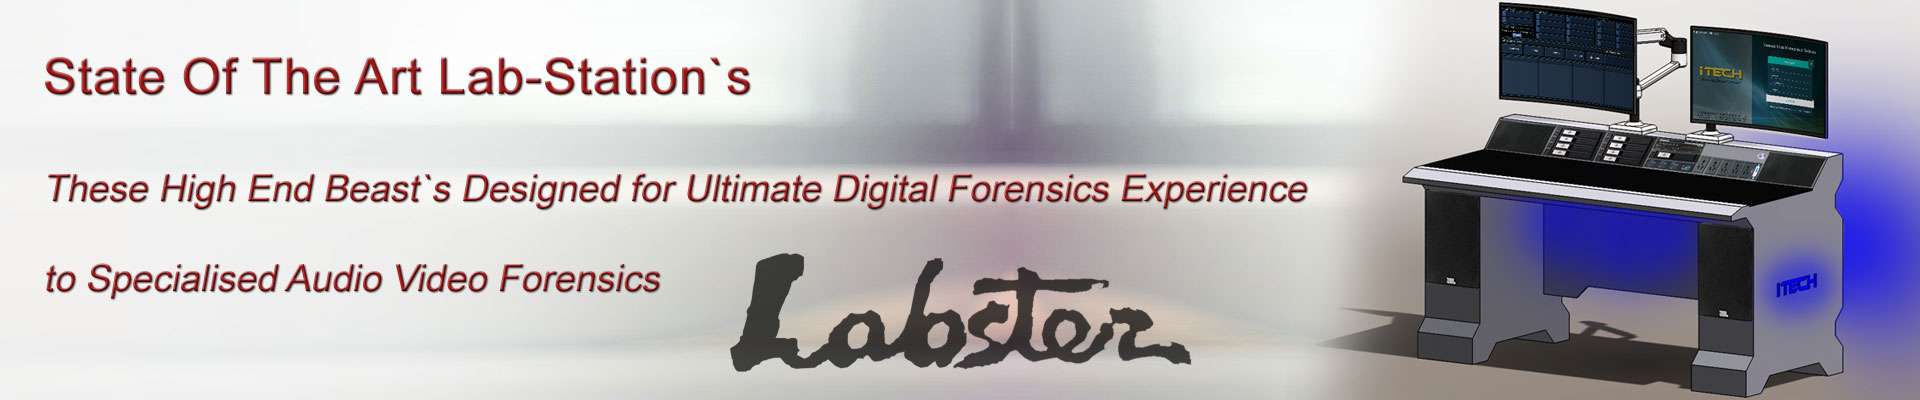 Labster, High End Console based Audio/Video Forensic Workstation